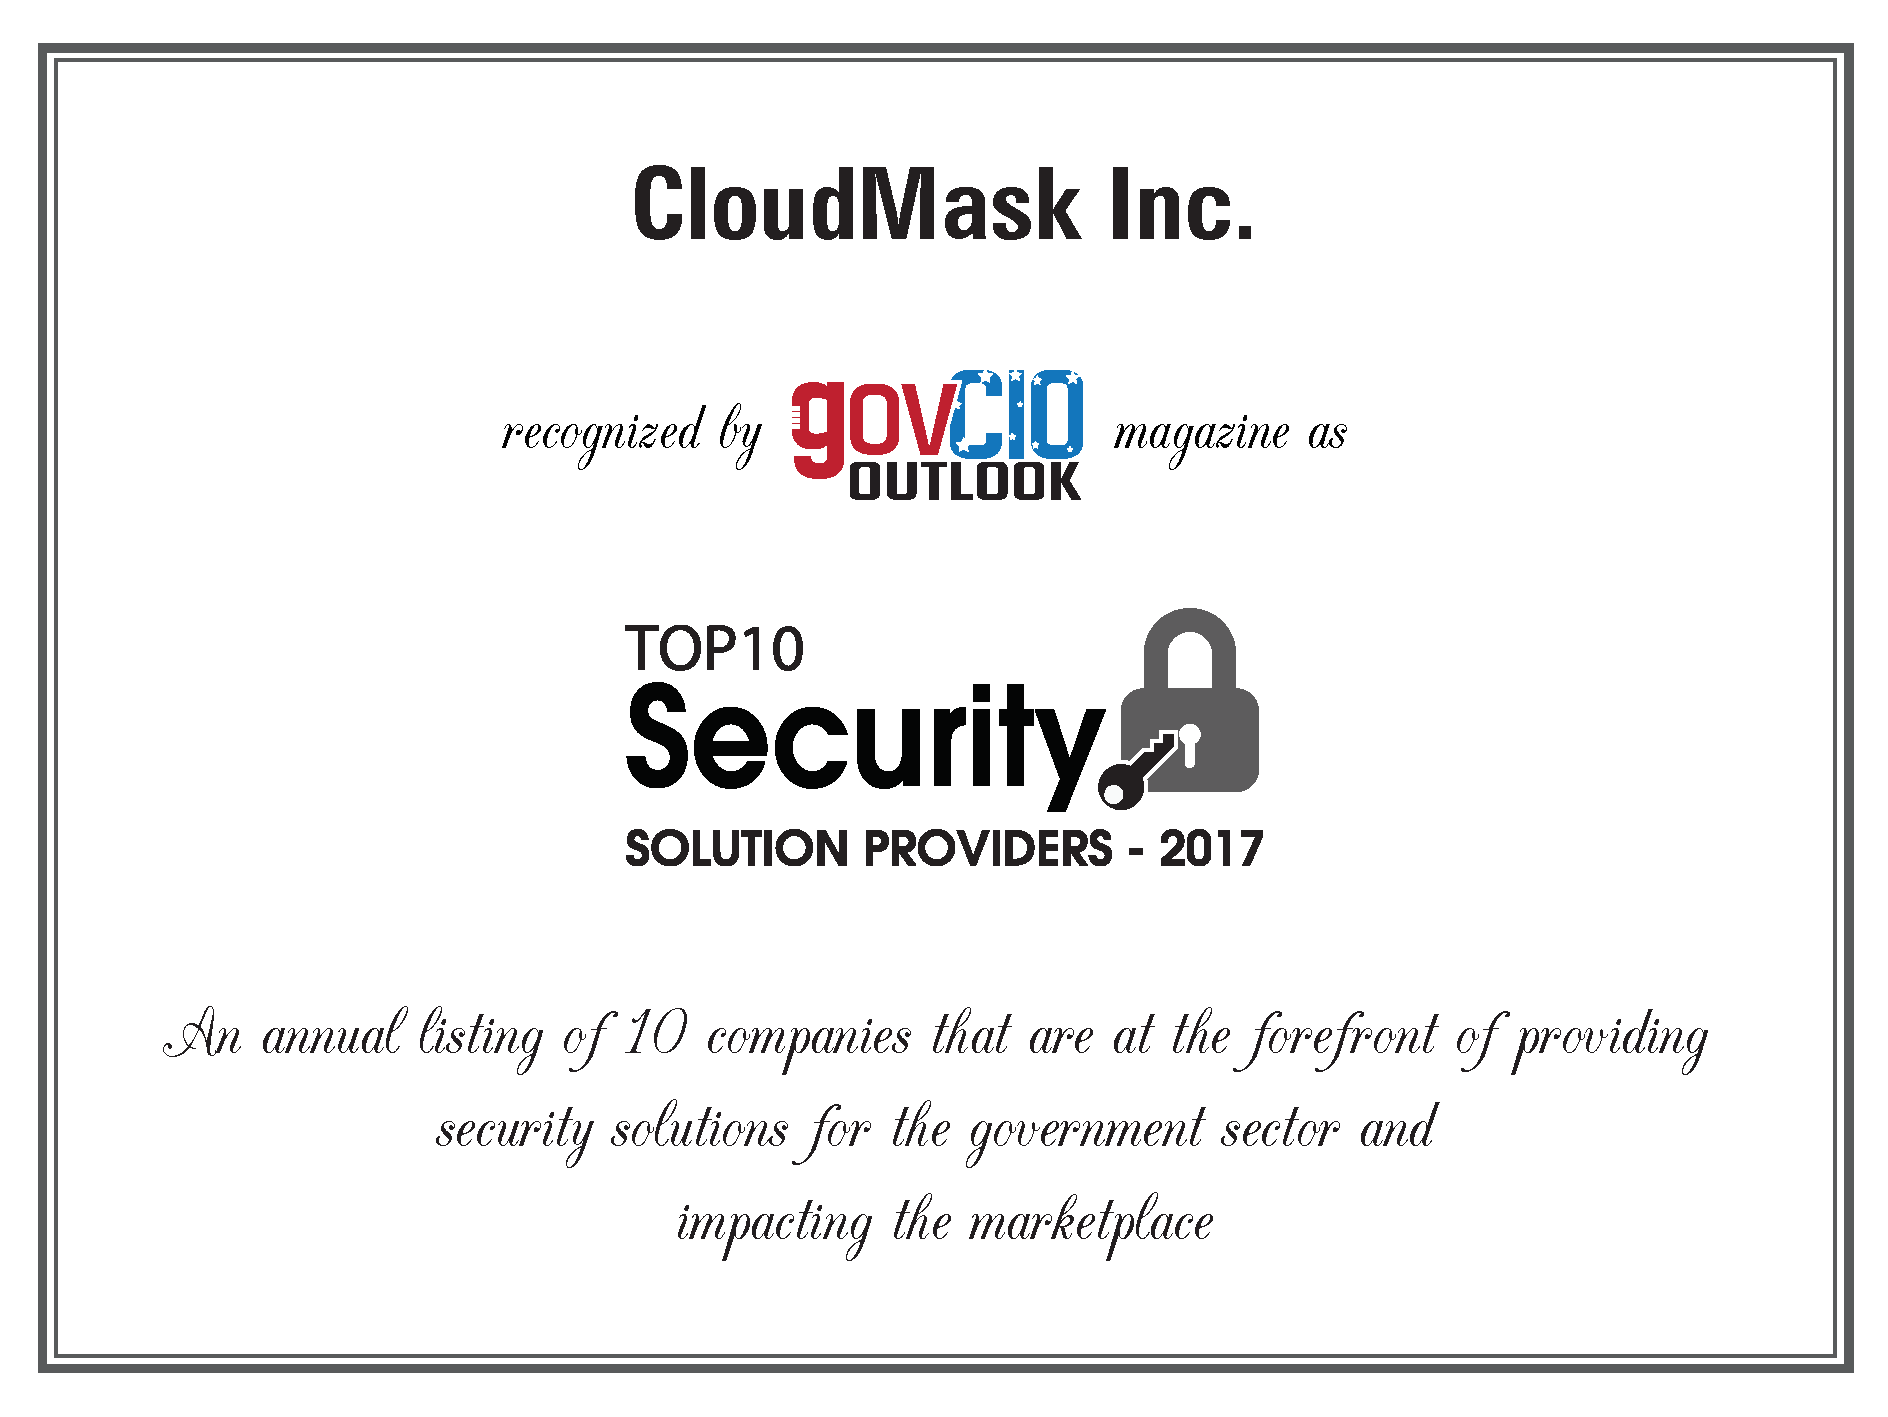 CloudMask Named to Gov CIO Outlook’s Top 10 Security Solution Providers 2017